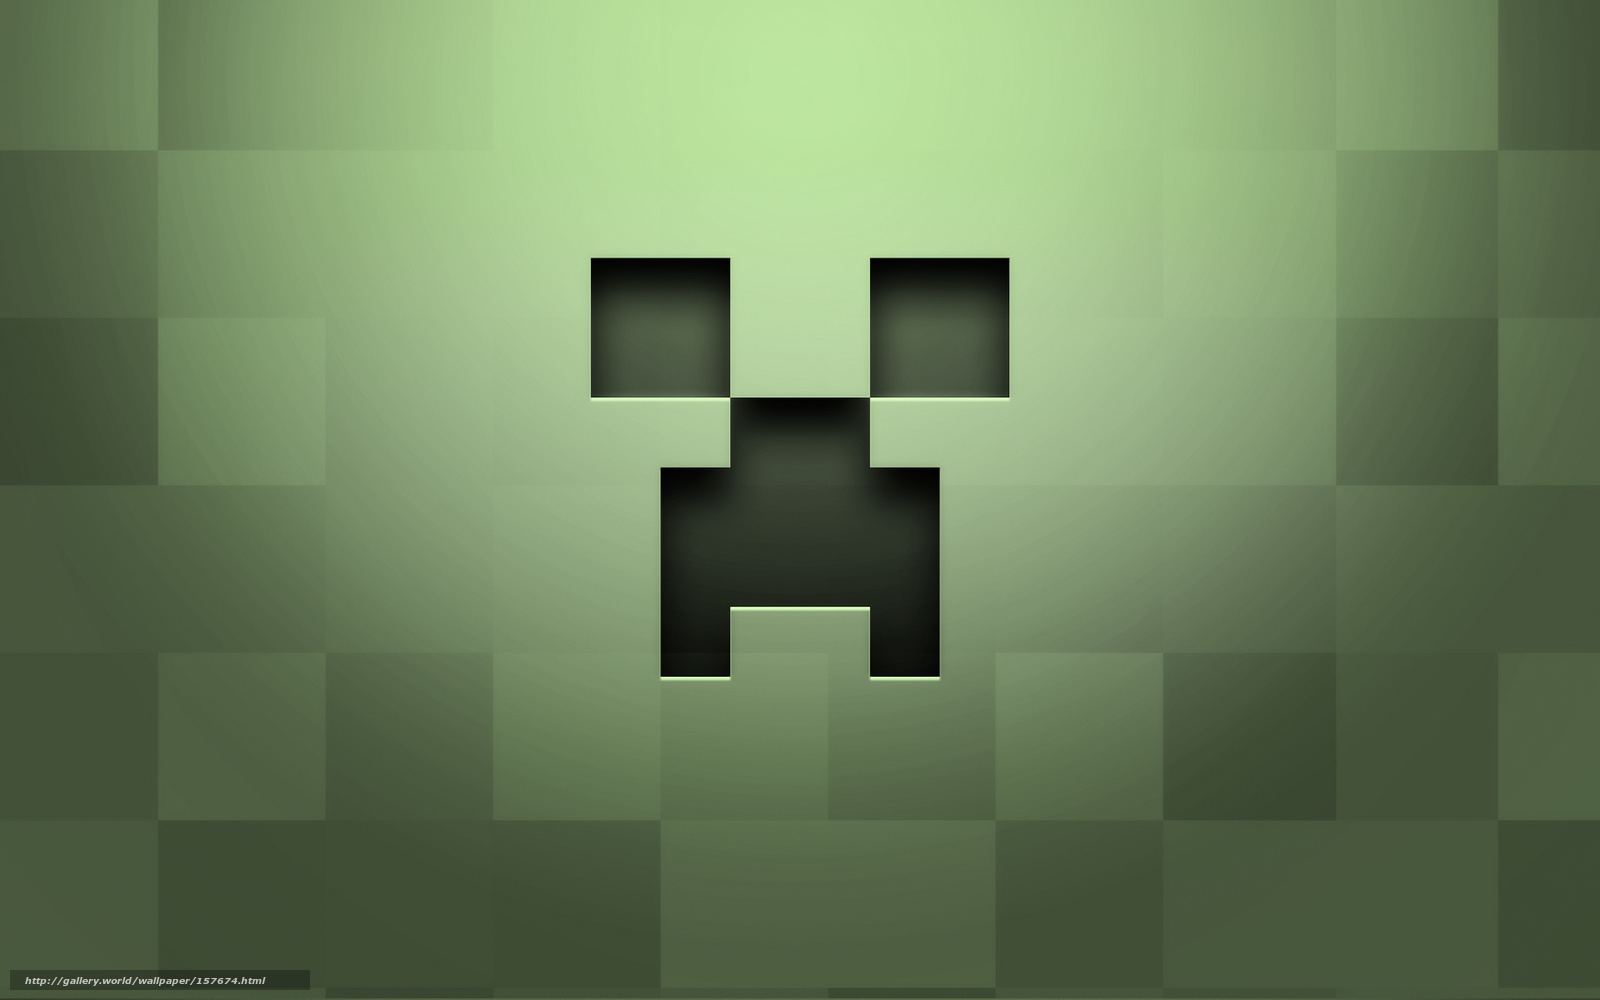 Download Wallpaper Green, Black, Abstraction, Squares - Minecraft Wallpaper Creeper - HD Wallpaper 